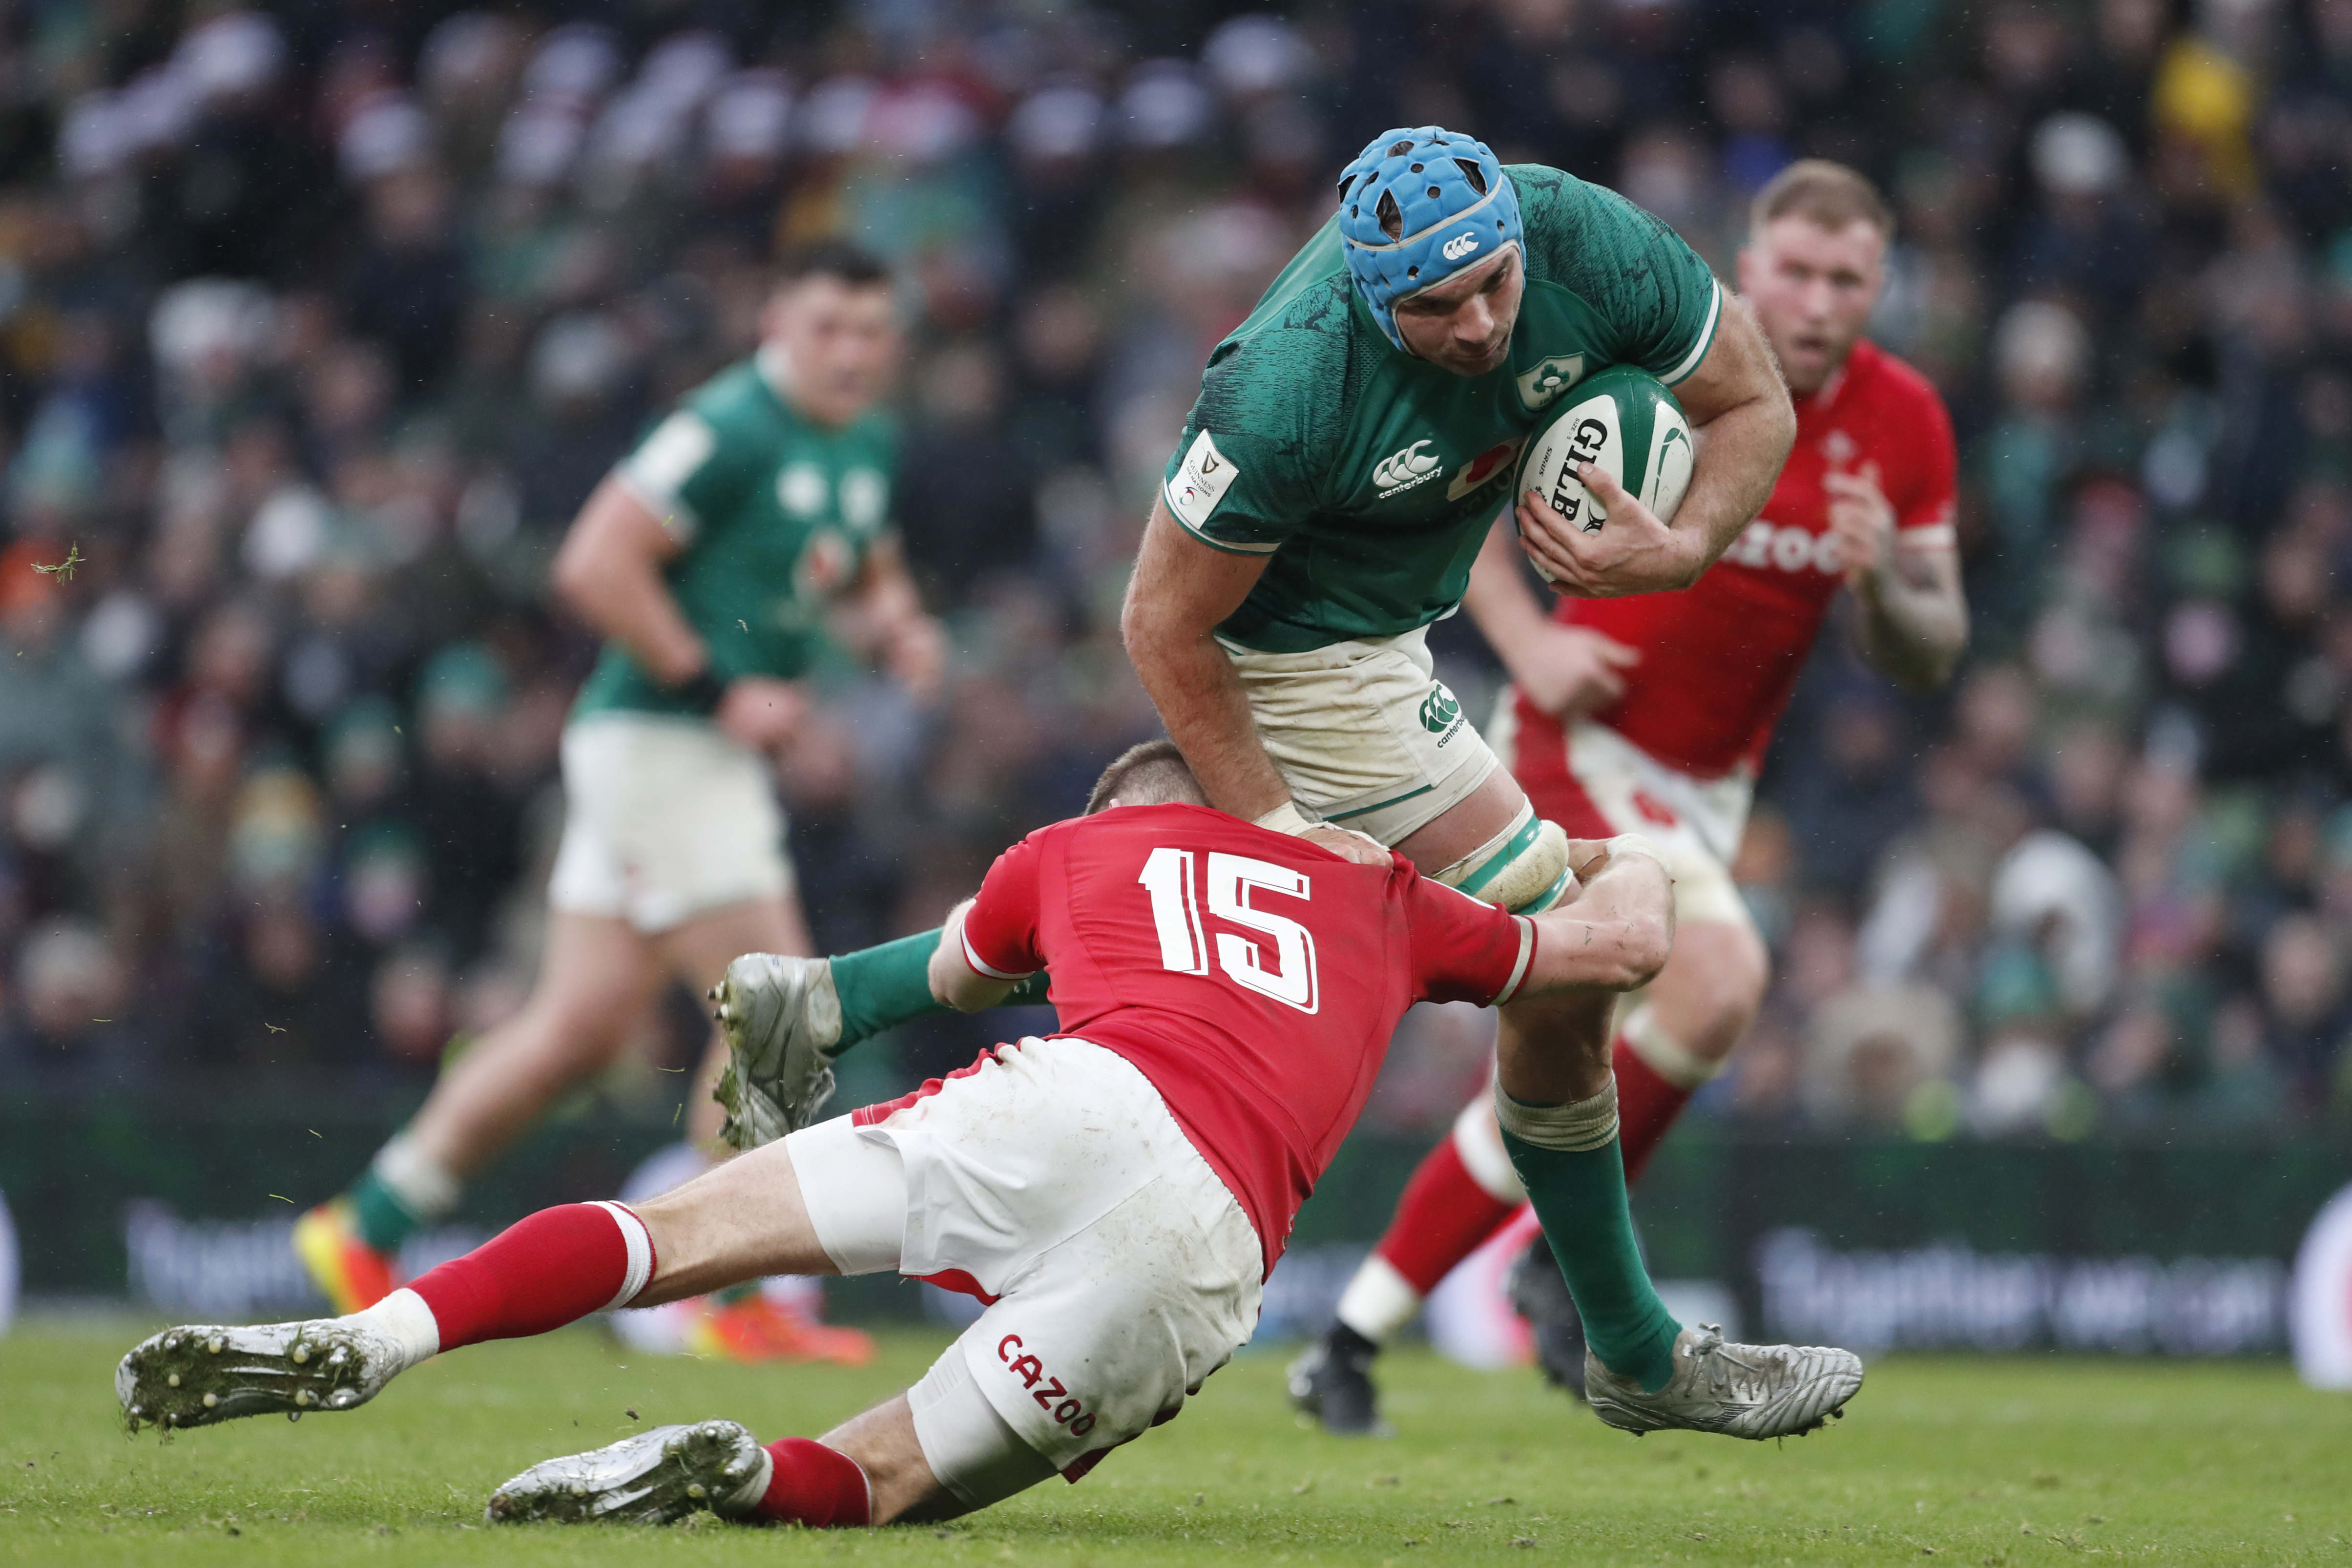 Ireland's Tadhg Beirne is tackled by Wales' Liam Williams during the Six Nations rugby union match between Ireland and Wales at the Aviva stadium in Dublin, Ireland, Saturday, Feb. 5, 2022. Ireland defeated Wales 29-7.(AP Photo/Peter Morrison)